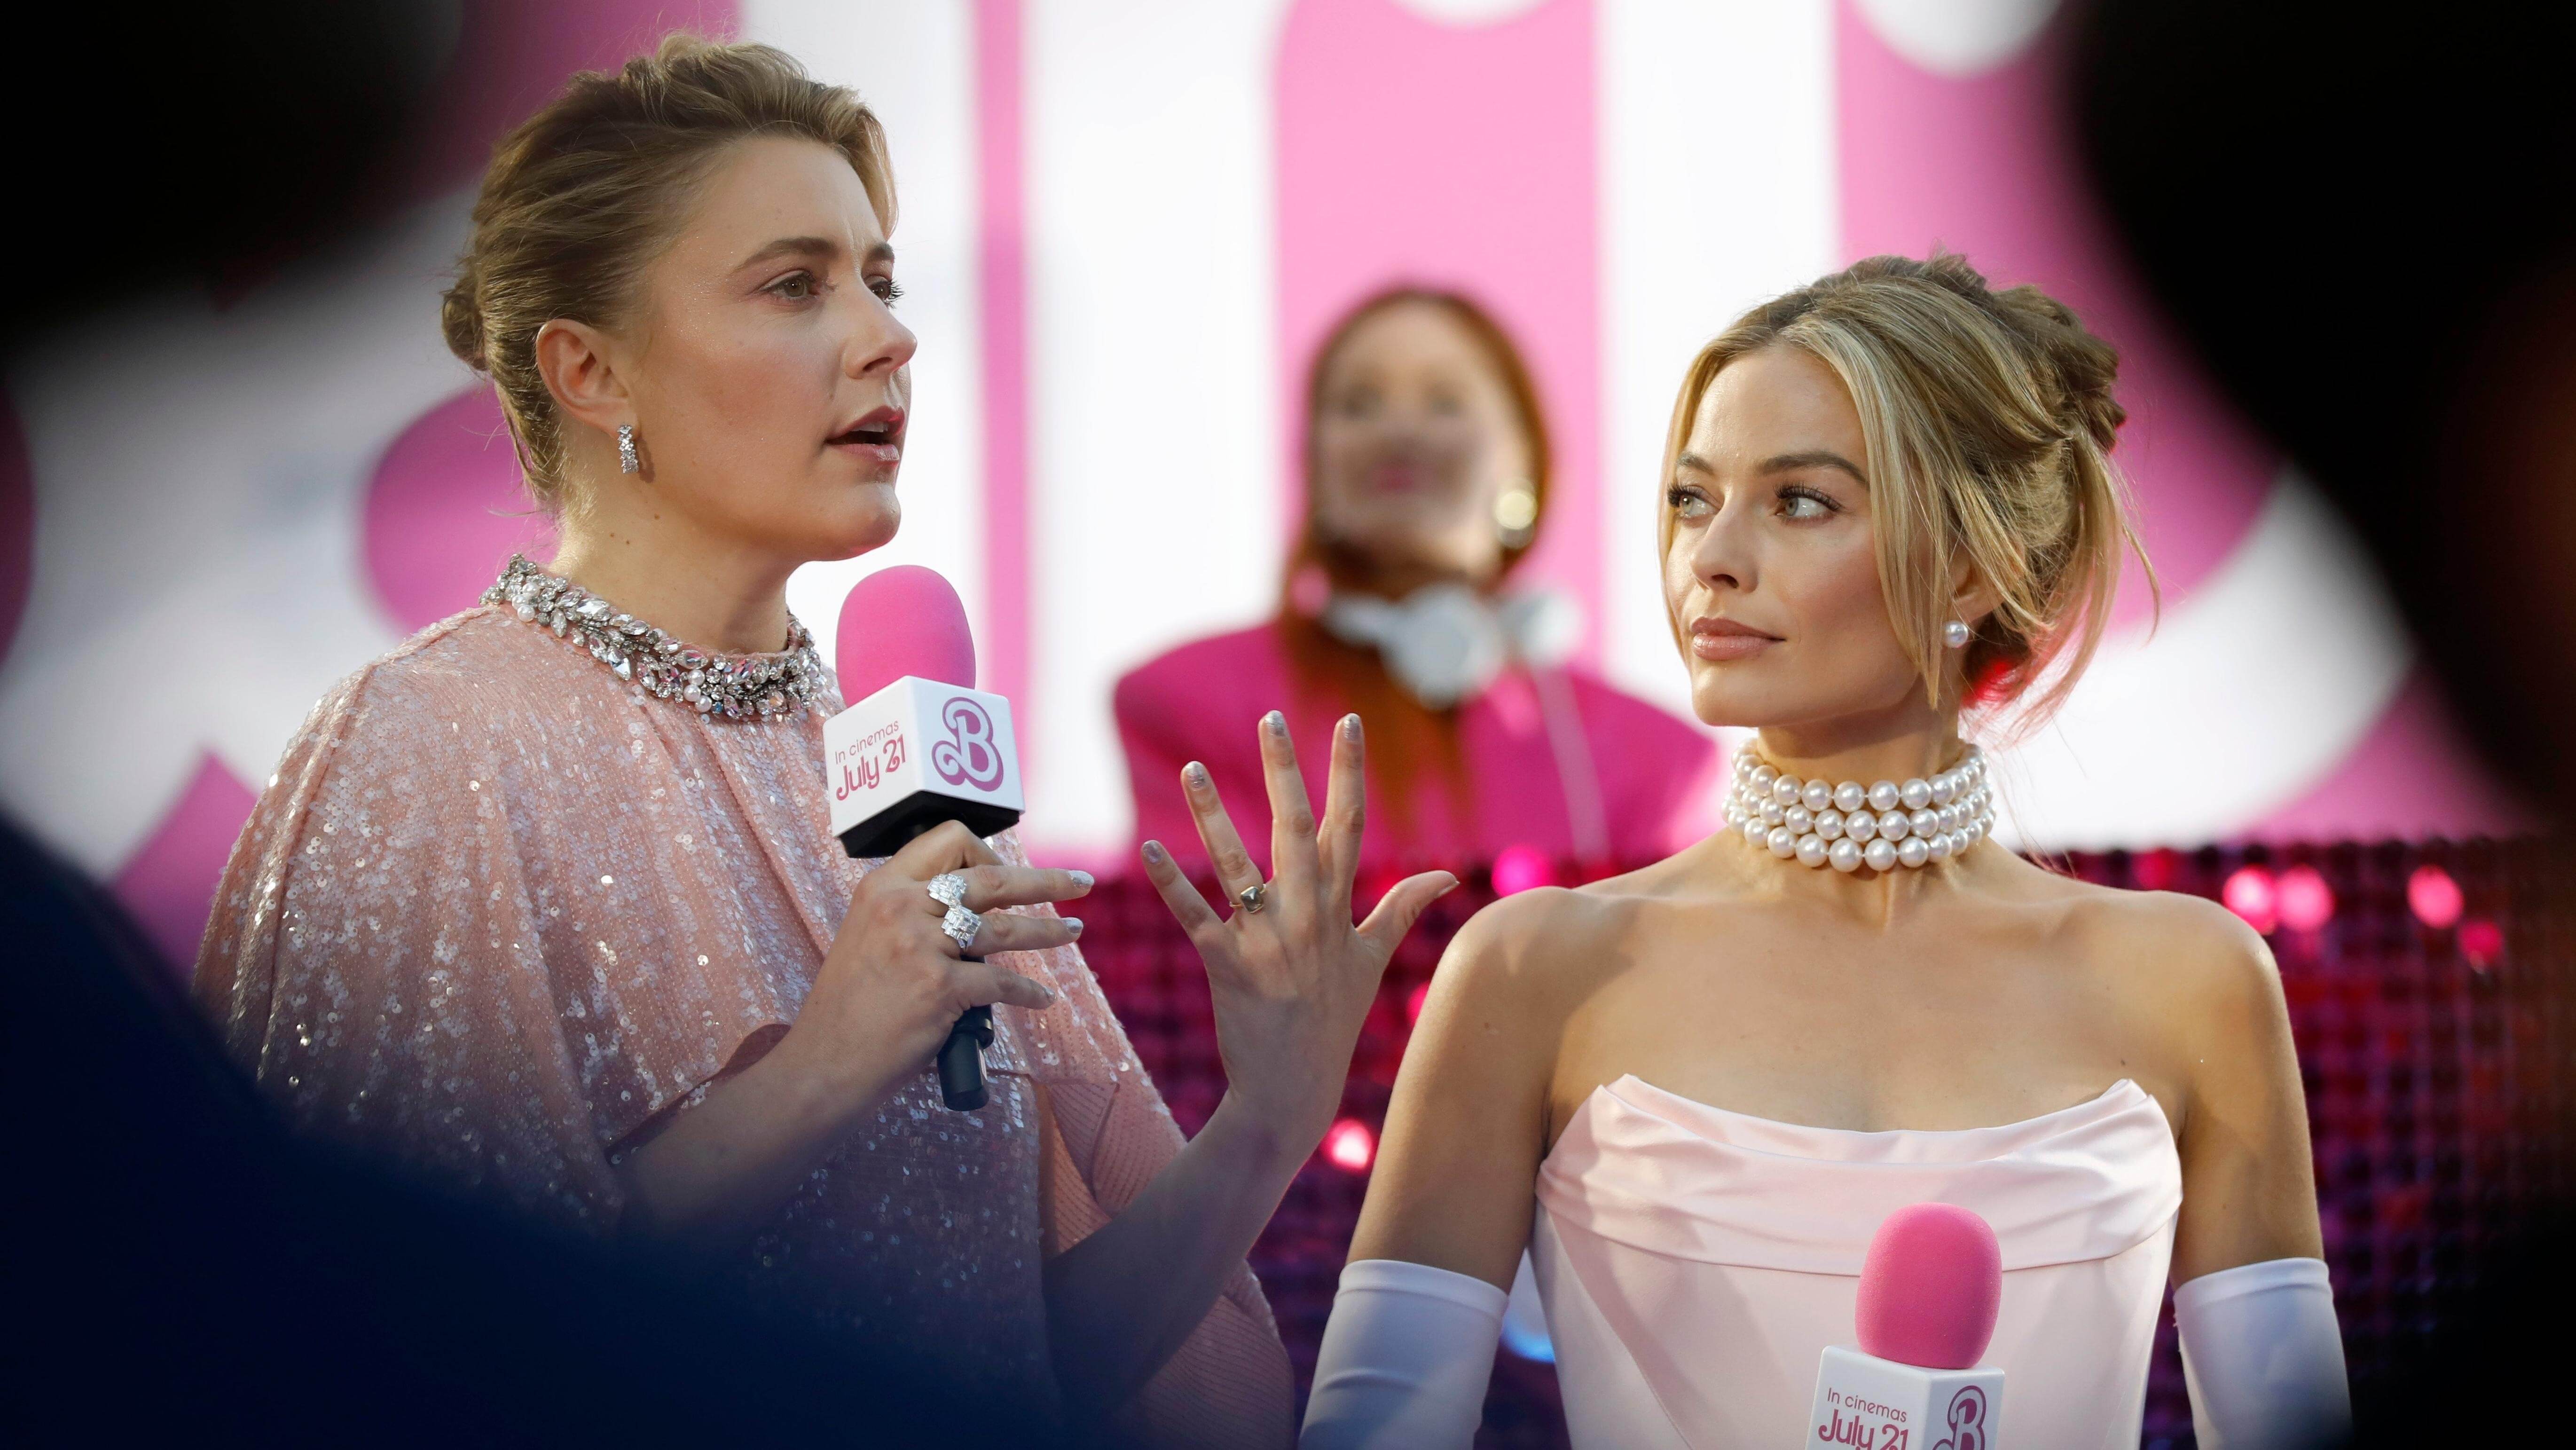 Margot Robbie felt “lost” creating the character of Barbie, but Greta Gerwig helped her find it